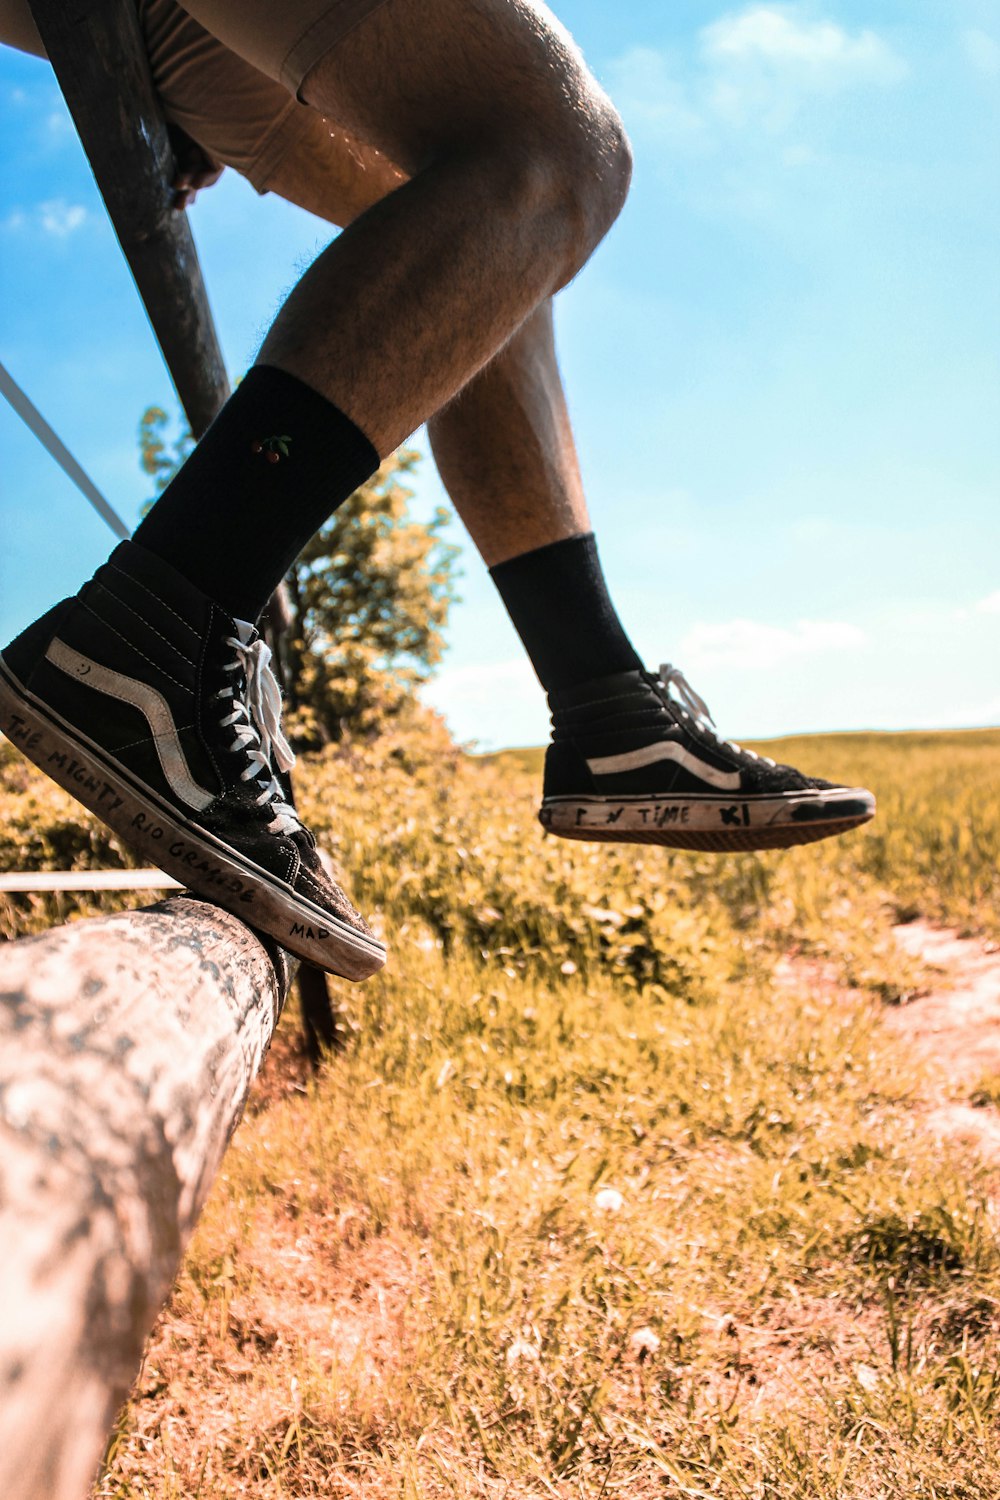 Person wearing black socks and black-and-white Vans shoes sitting on black rod photo – Apparel Image on Unsplash